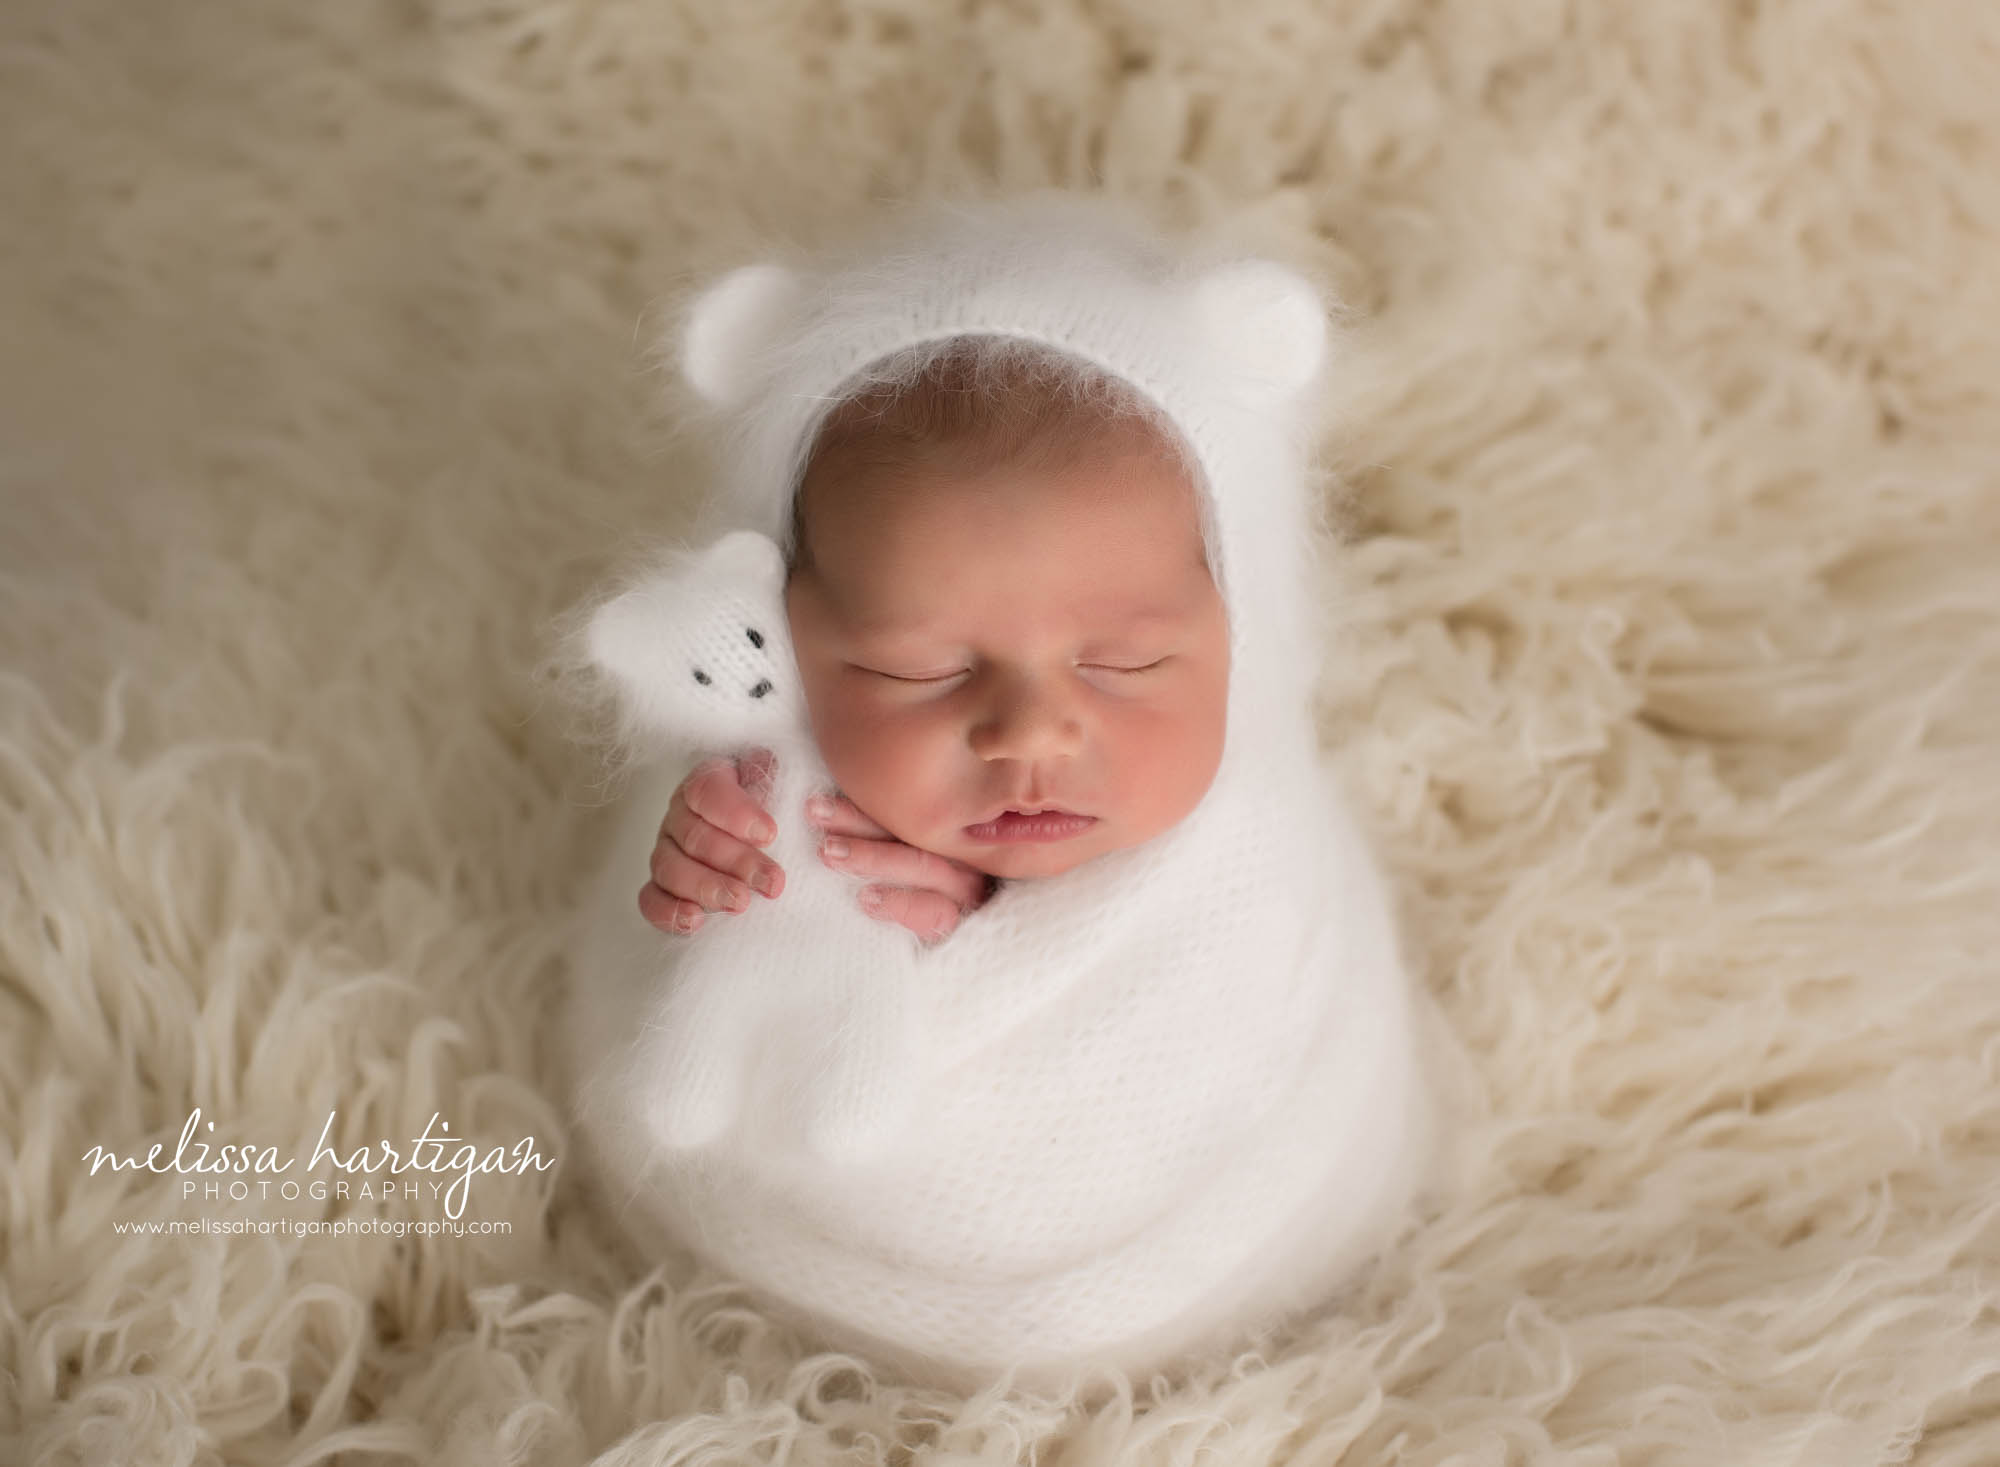 newborn baby boy wrapped in white knitted wrap holding knitted newborn teddy wearing matching knitted bear bonnet